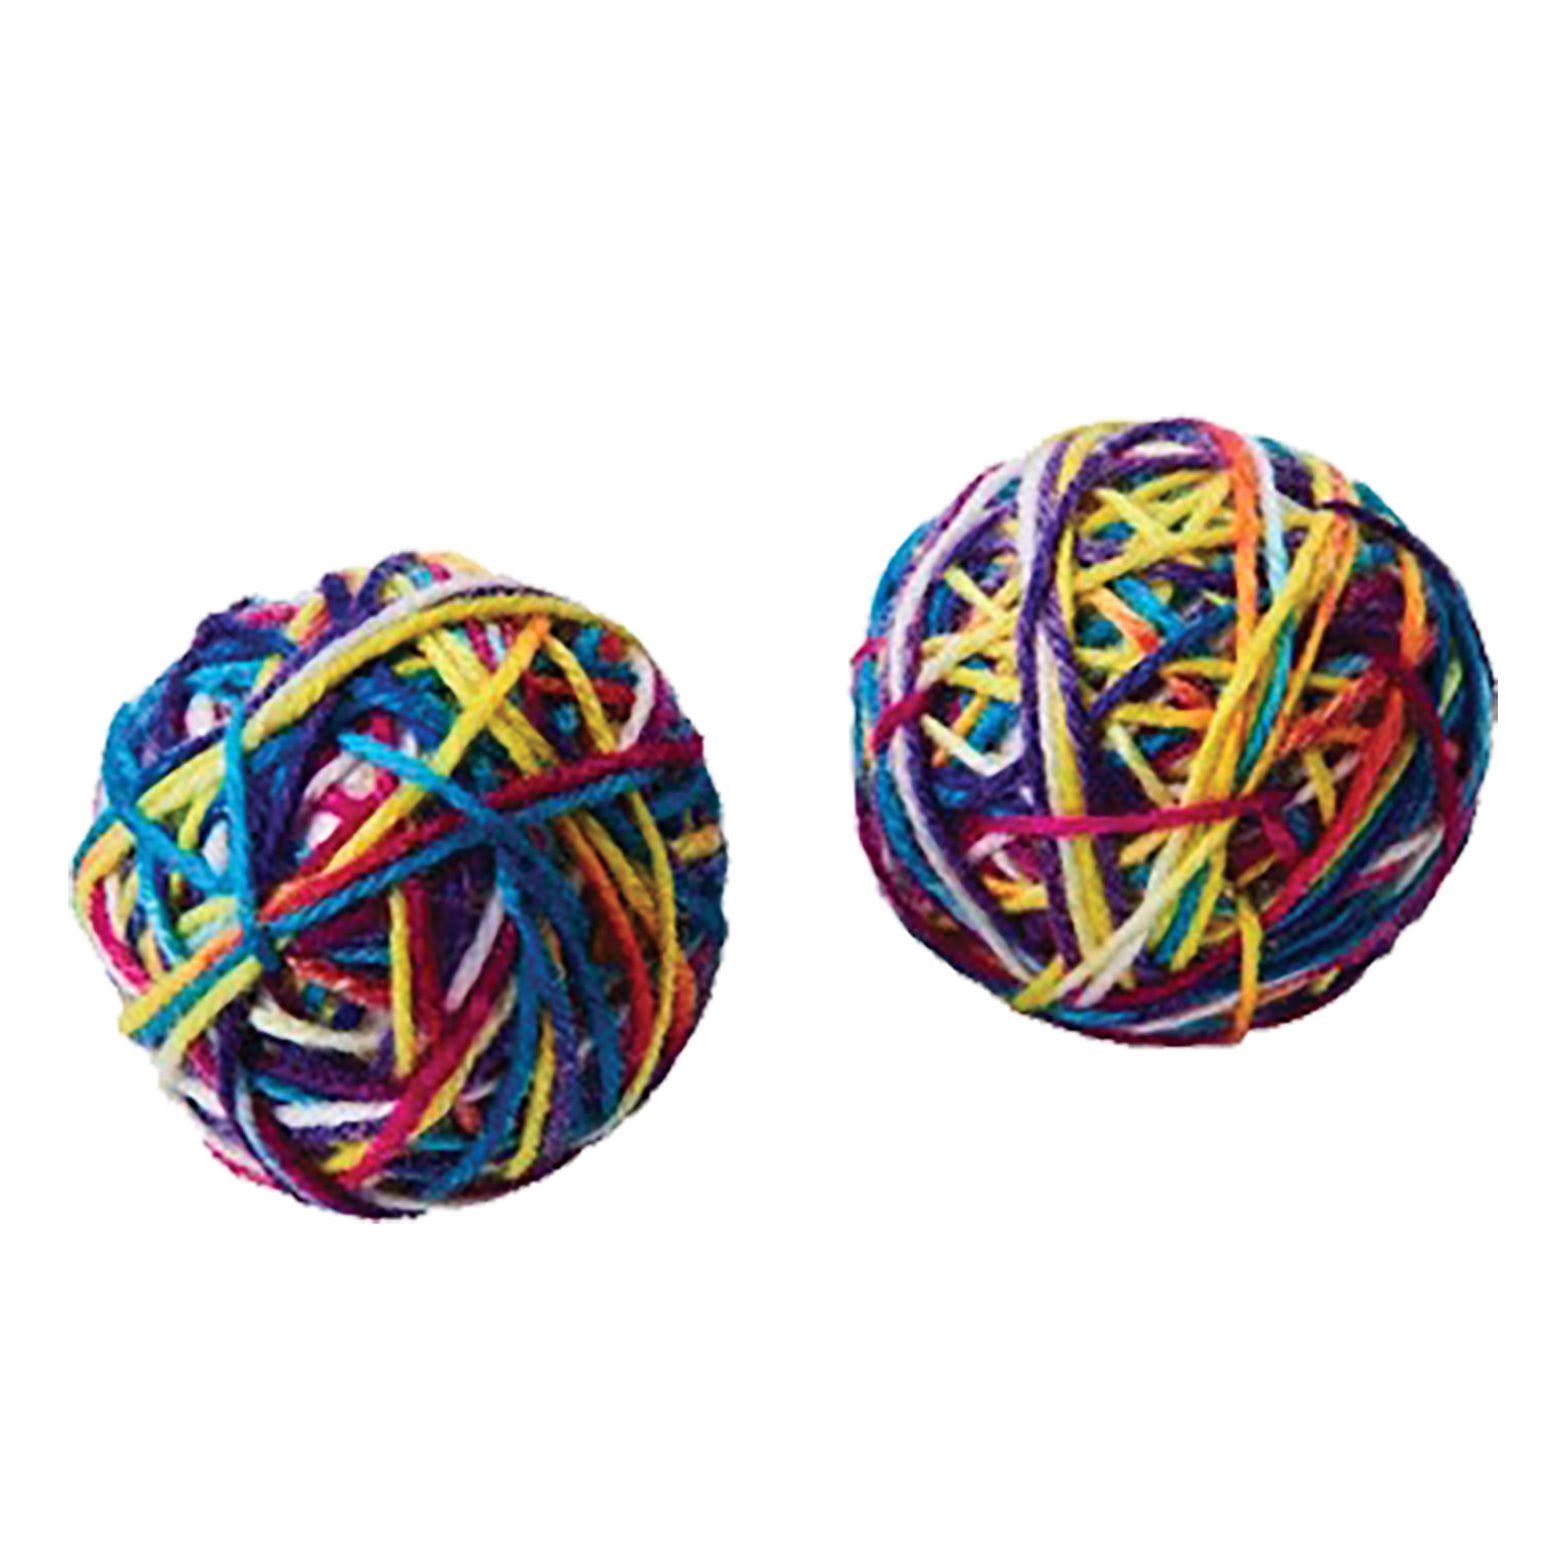 Sew Much Fun yarn balls for cats, 2-pack | Spot